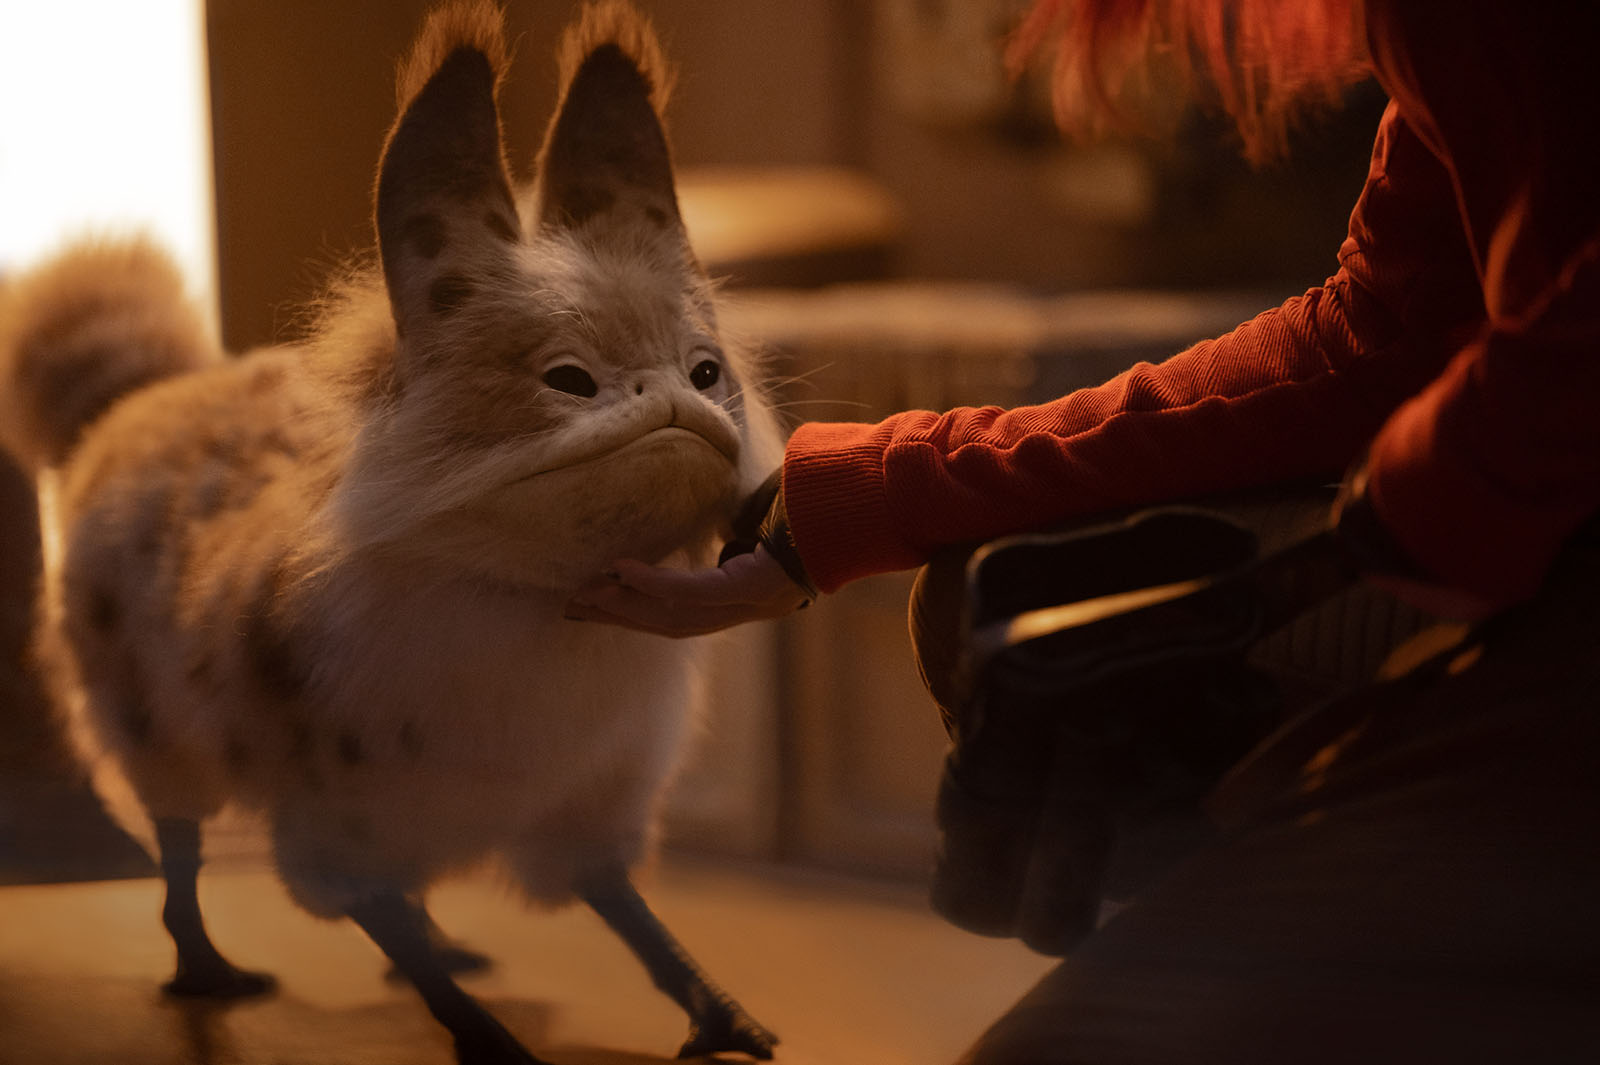 The Noti aren’t the only cute creatures in Ahsoka. Murley the Loth-cat is also making fans go “Aww!”